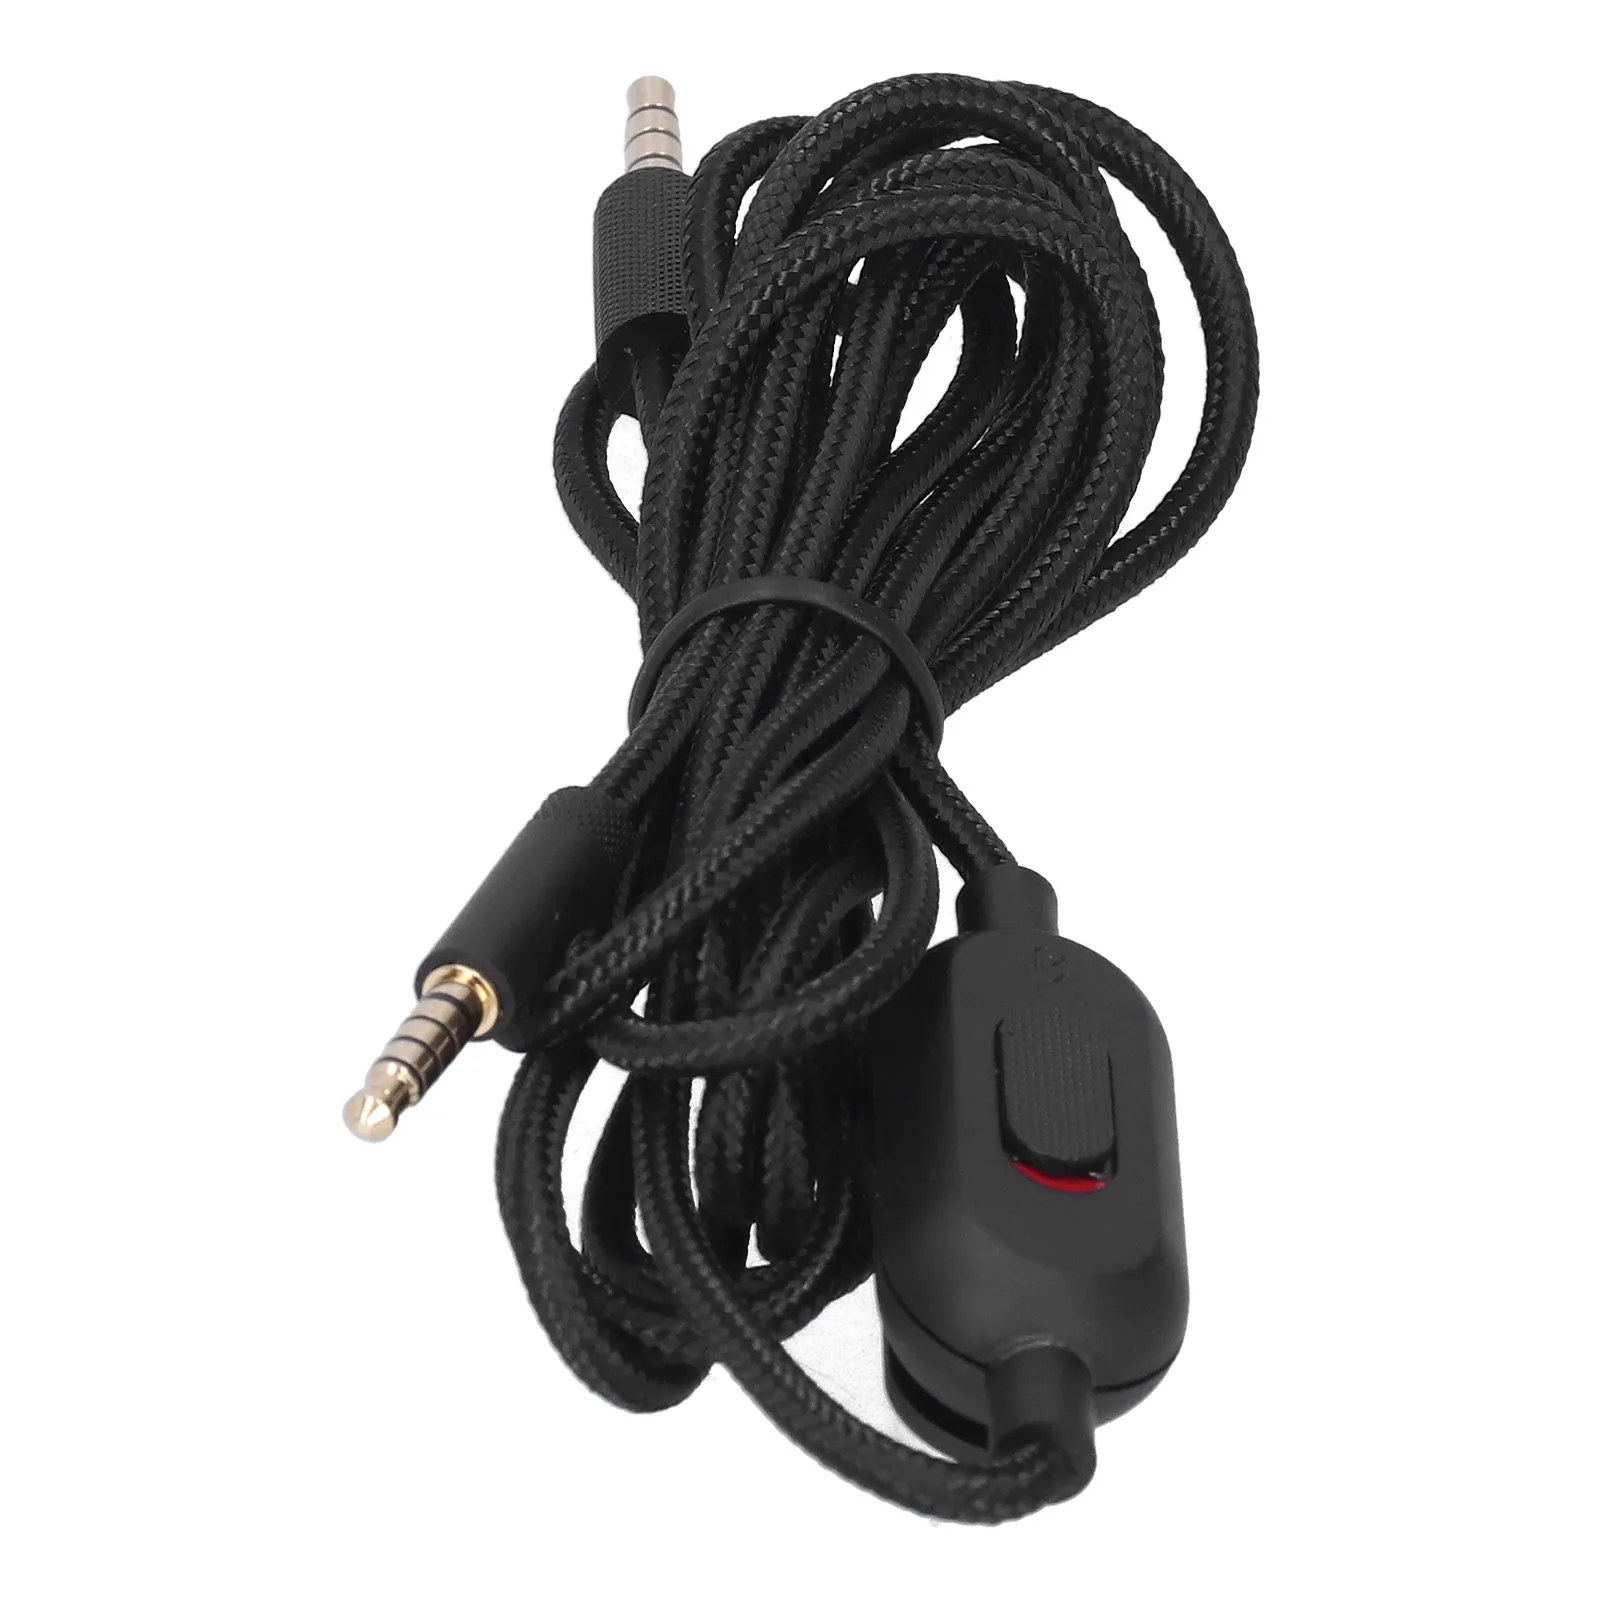 Game-Headphone-Audio-Cable-with-Volume-Microphone-Control-Suitable-for-Logitech-G233-G433-GPRO-GPROX.jpg